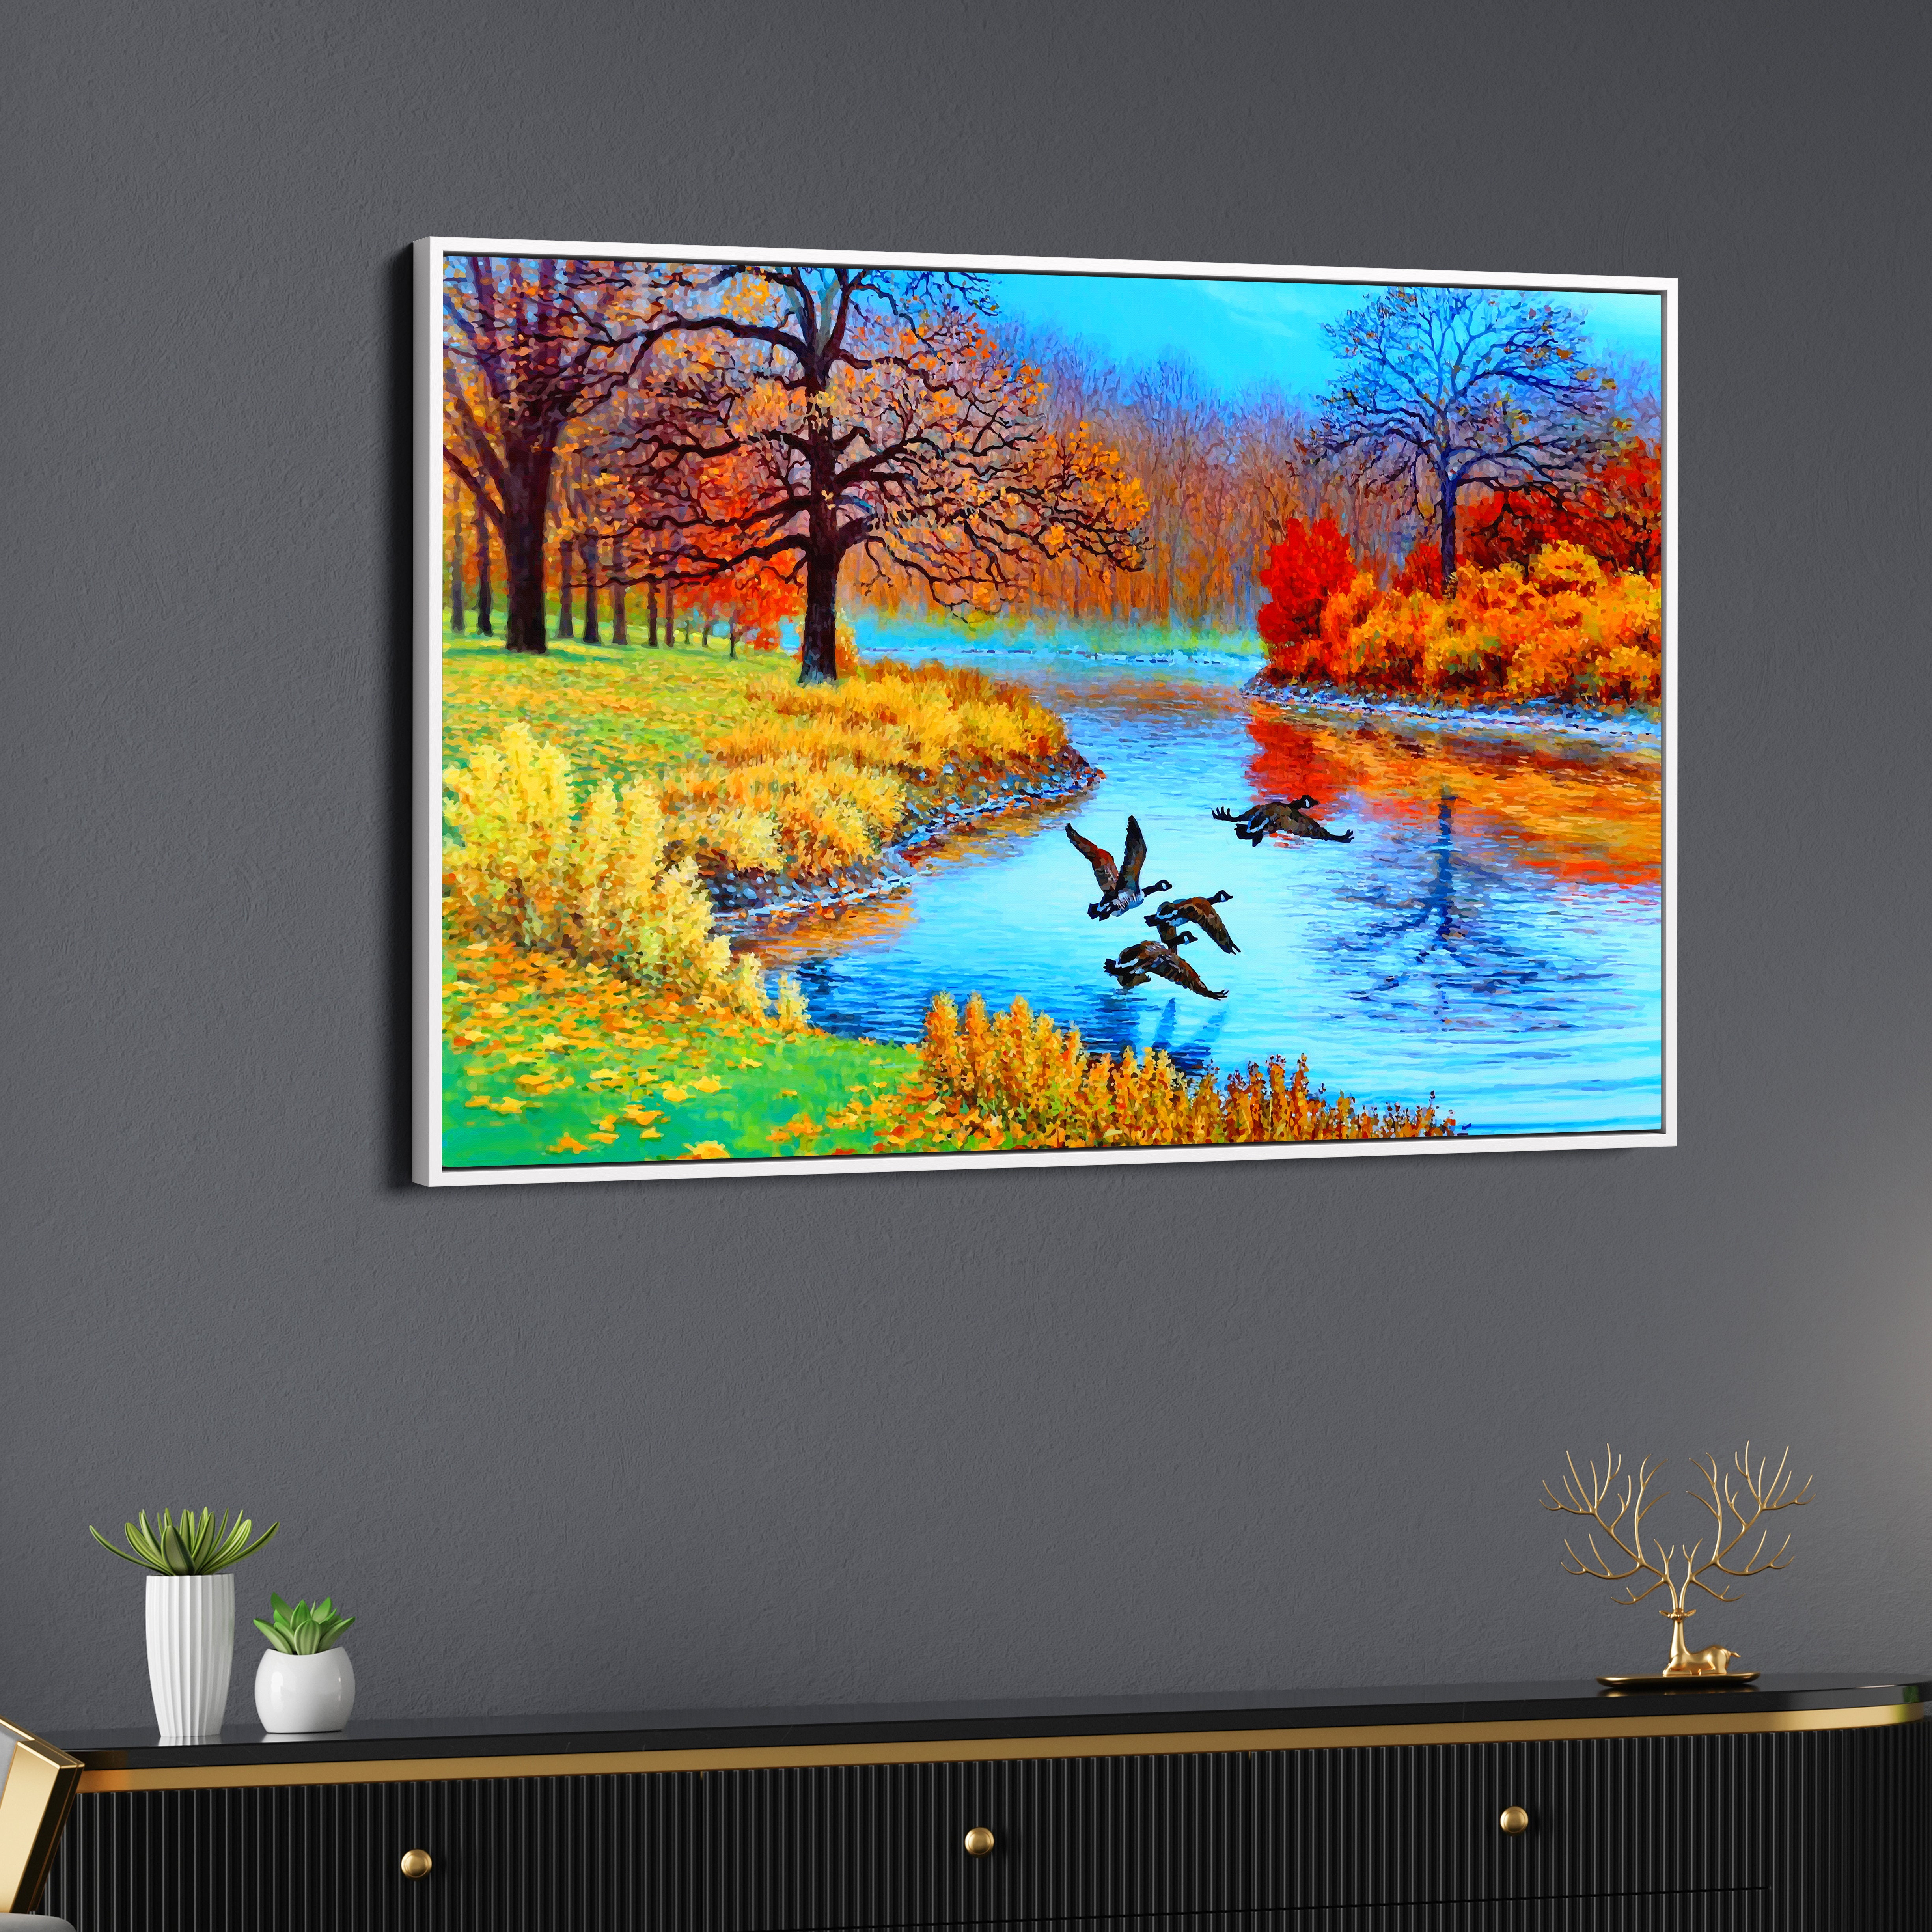 Beautiful Lake And Birds Scenery Canvas Wall Painting